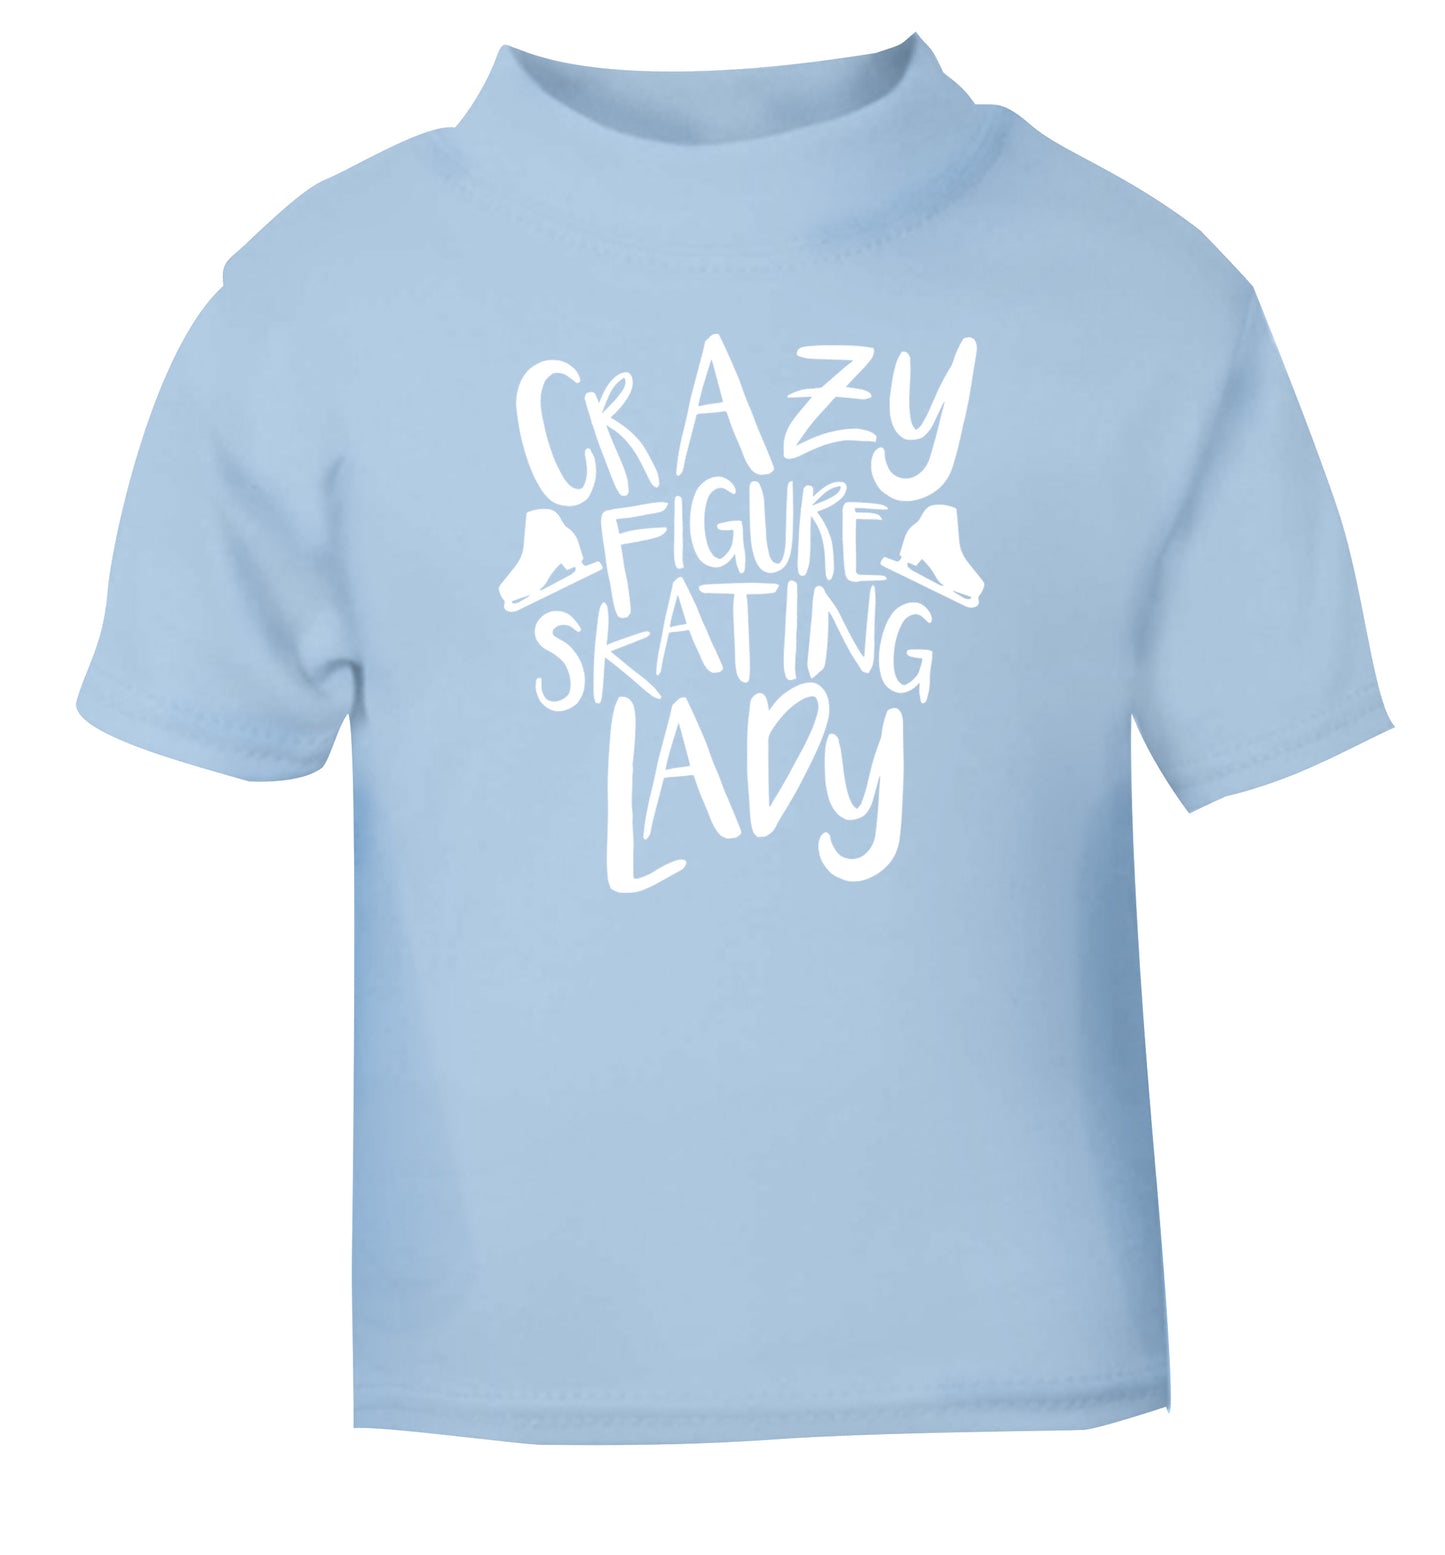 Crazy figure skating lady light blue Baby Toddler Tshirt 2 Years